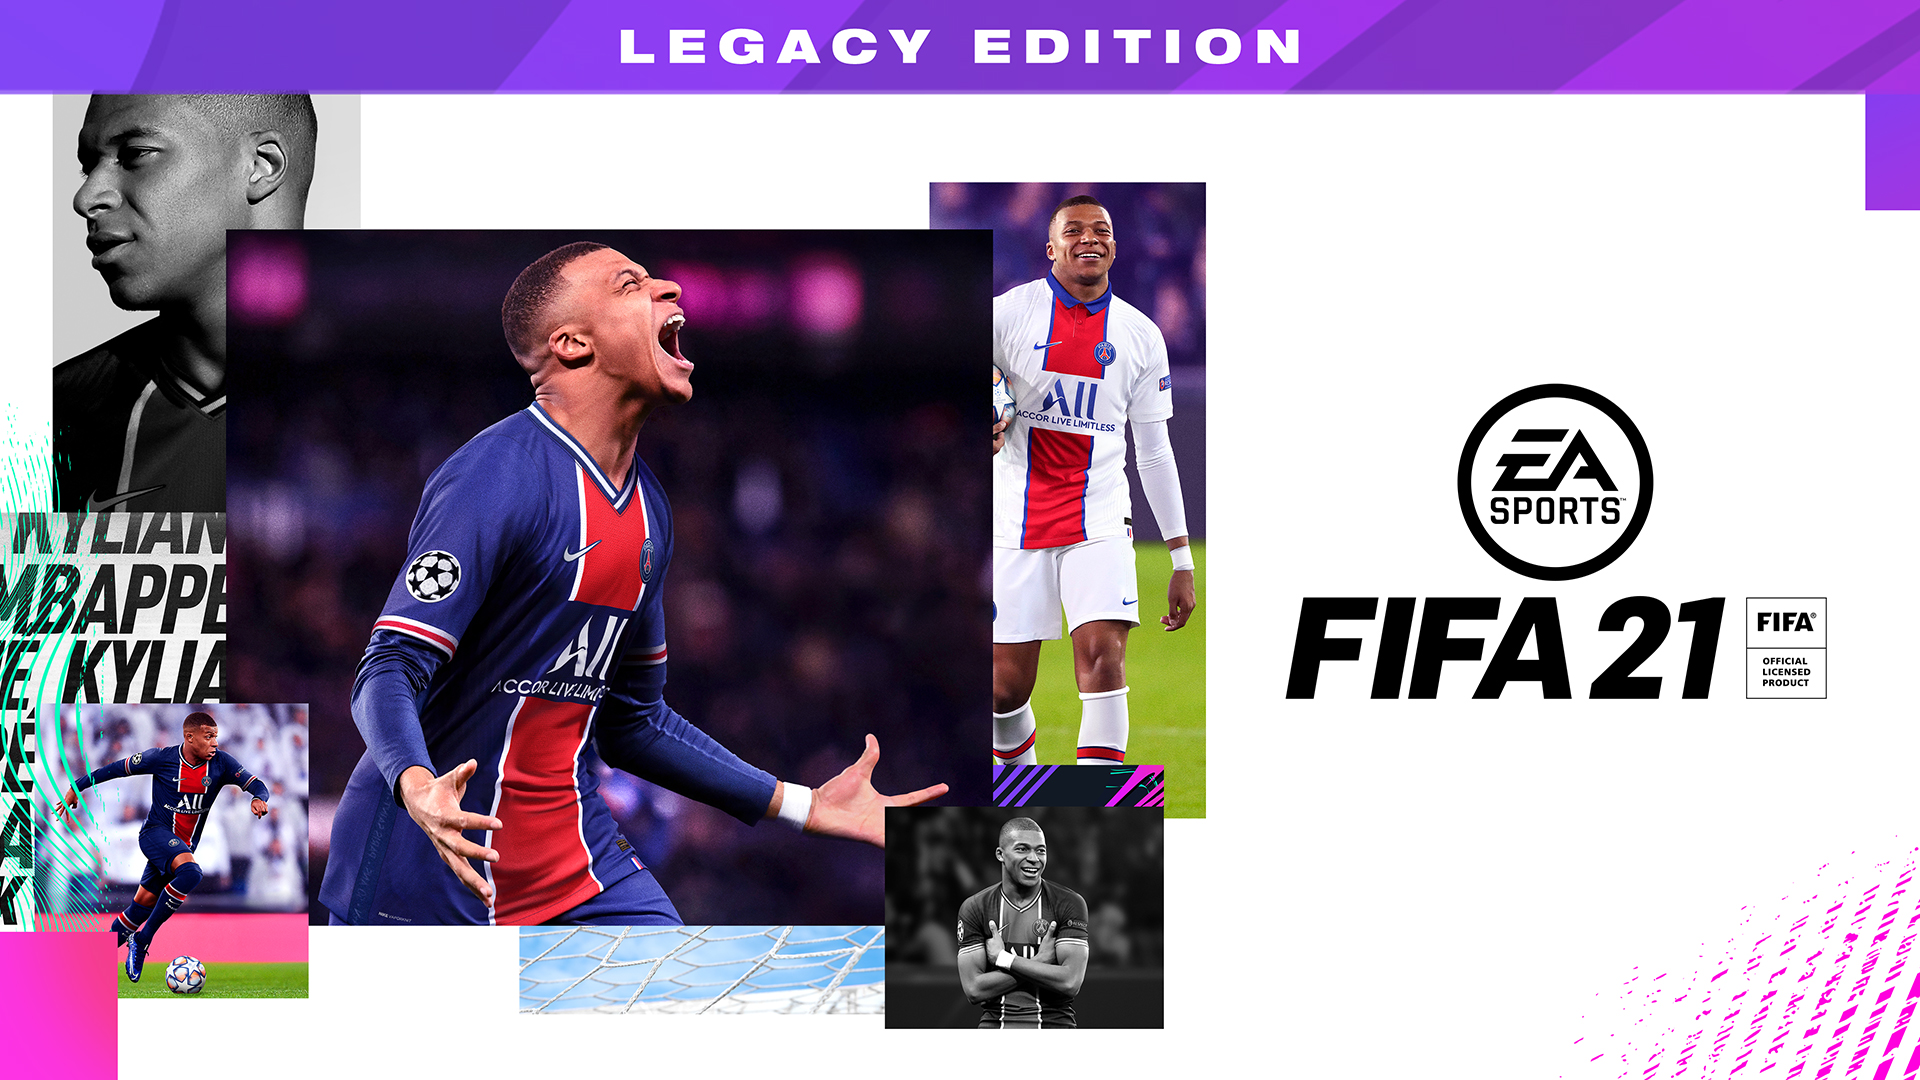 FIFA 21 on Nintendo Switch will cost $49.99 for basic updates